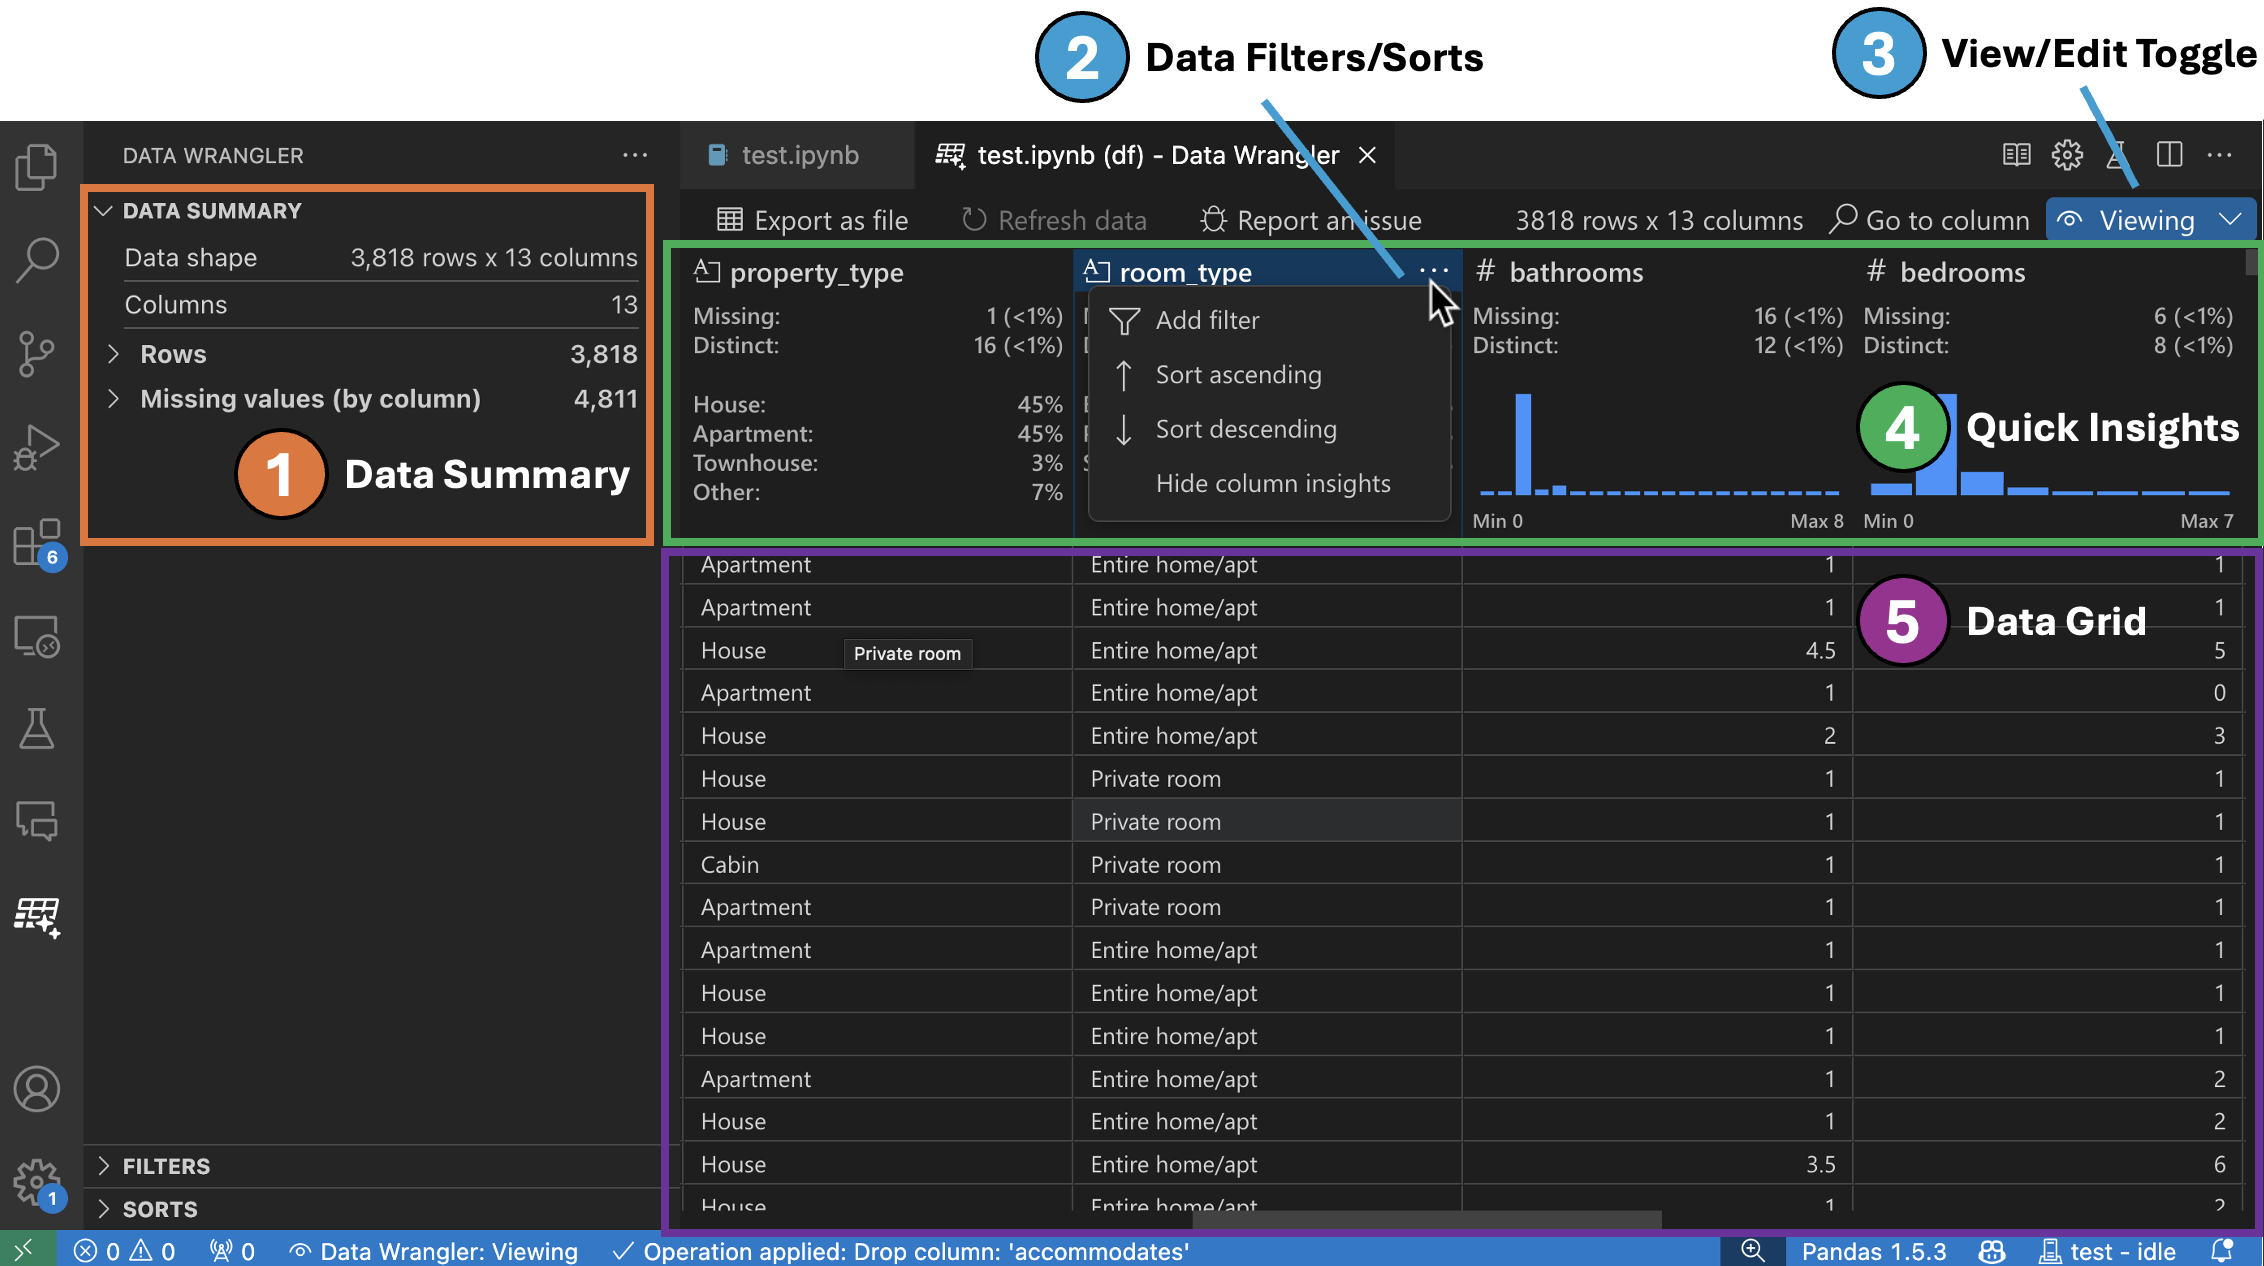 a screenshot showing the different components in the UI for Data Wrangler in Viewing mode